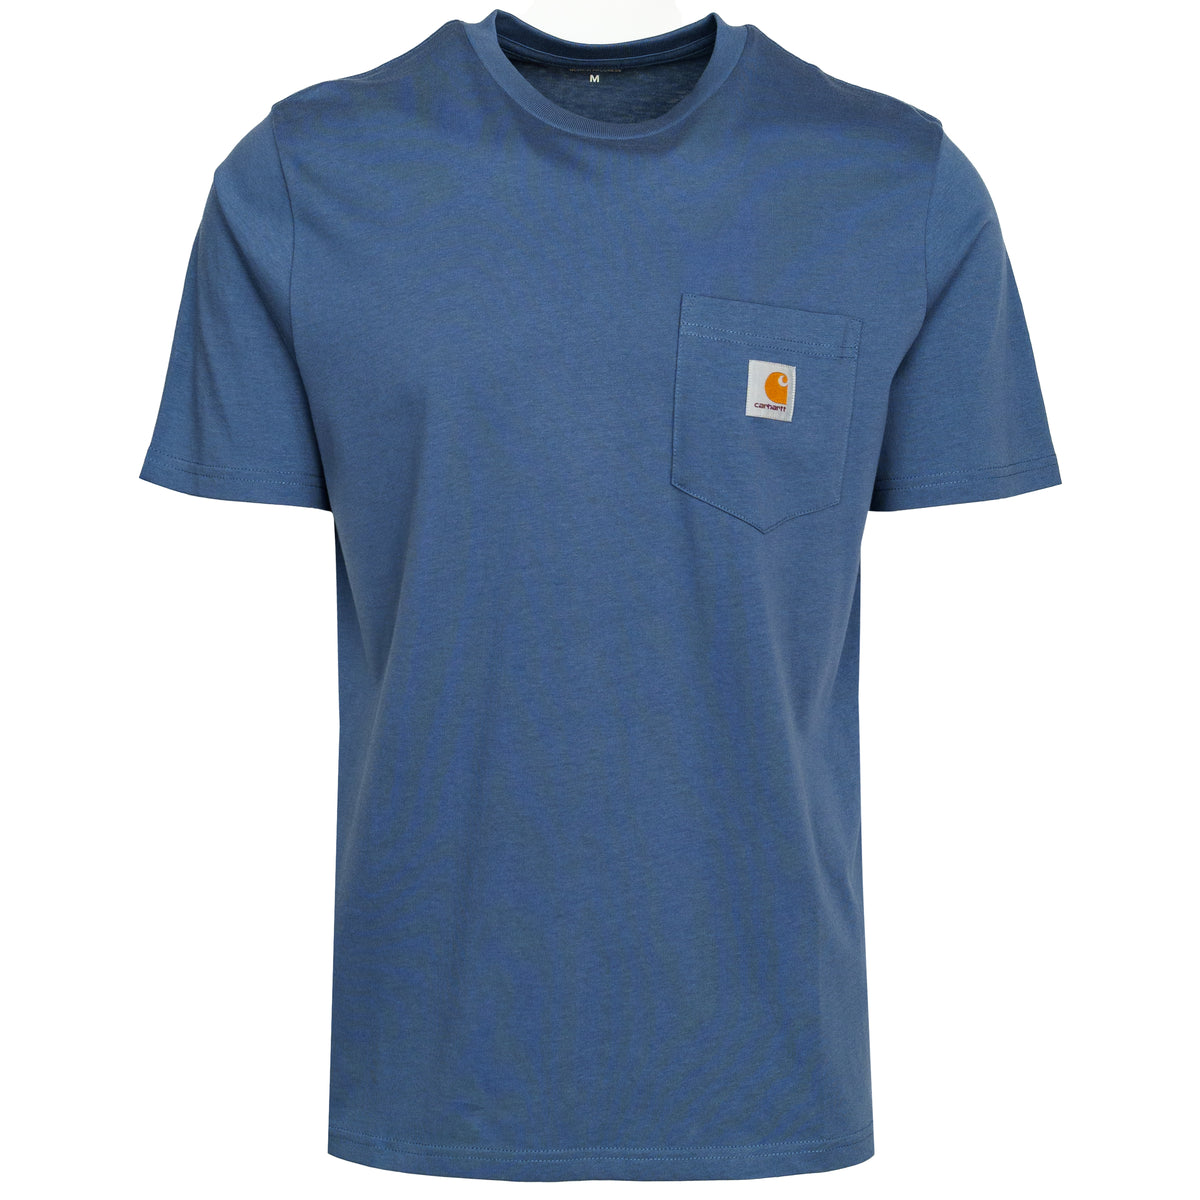 Load image into Gallery viewer, Carhartt WIP Hudson Blue Pocket Tee
